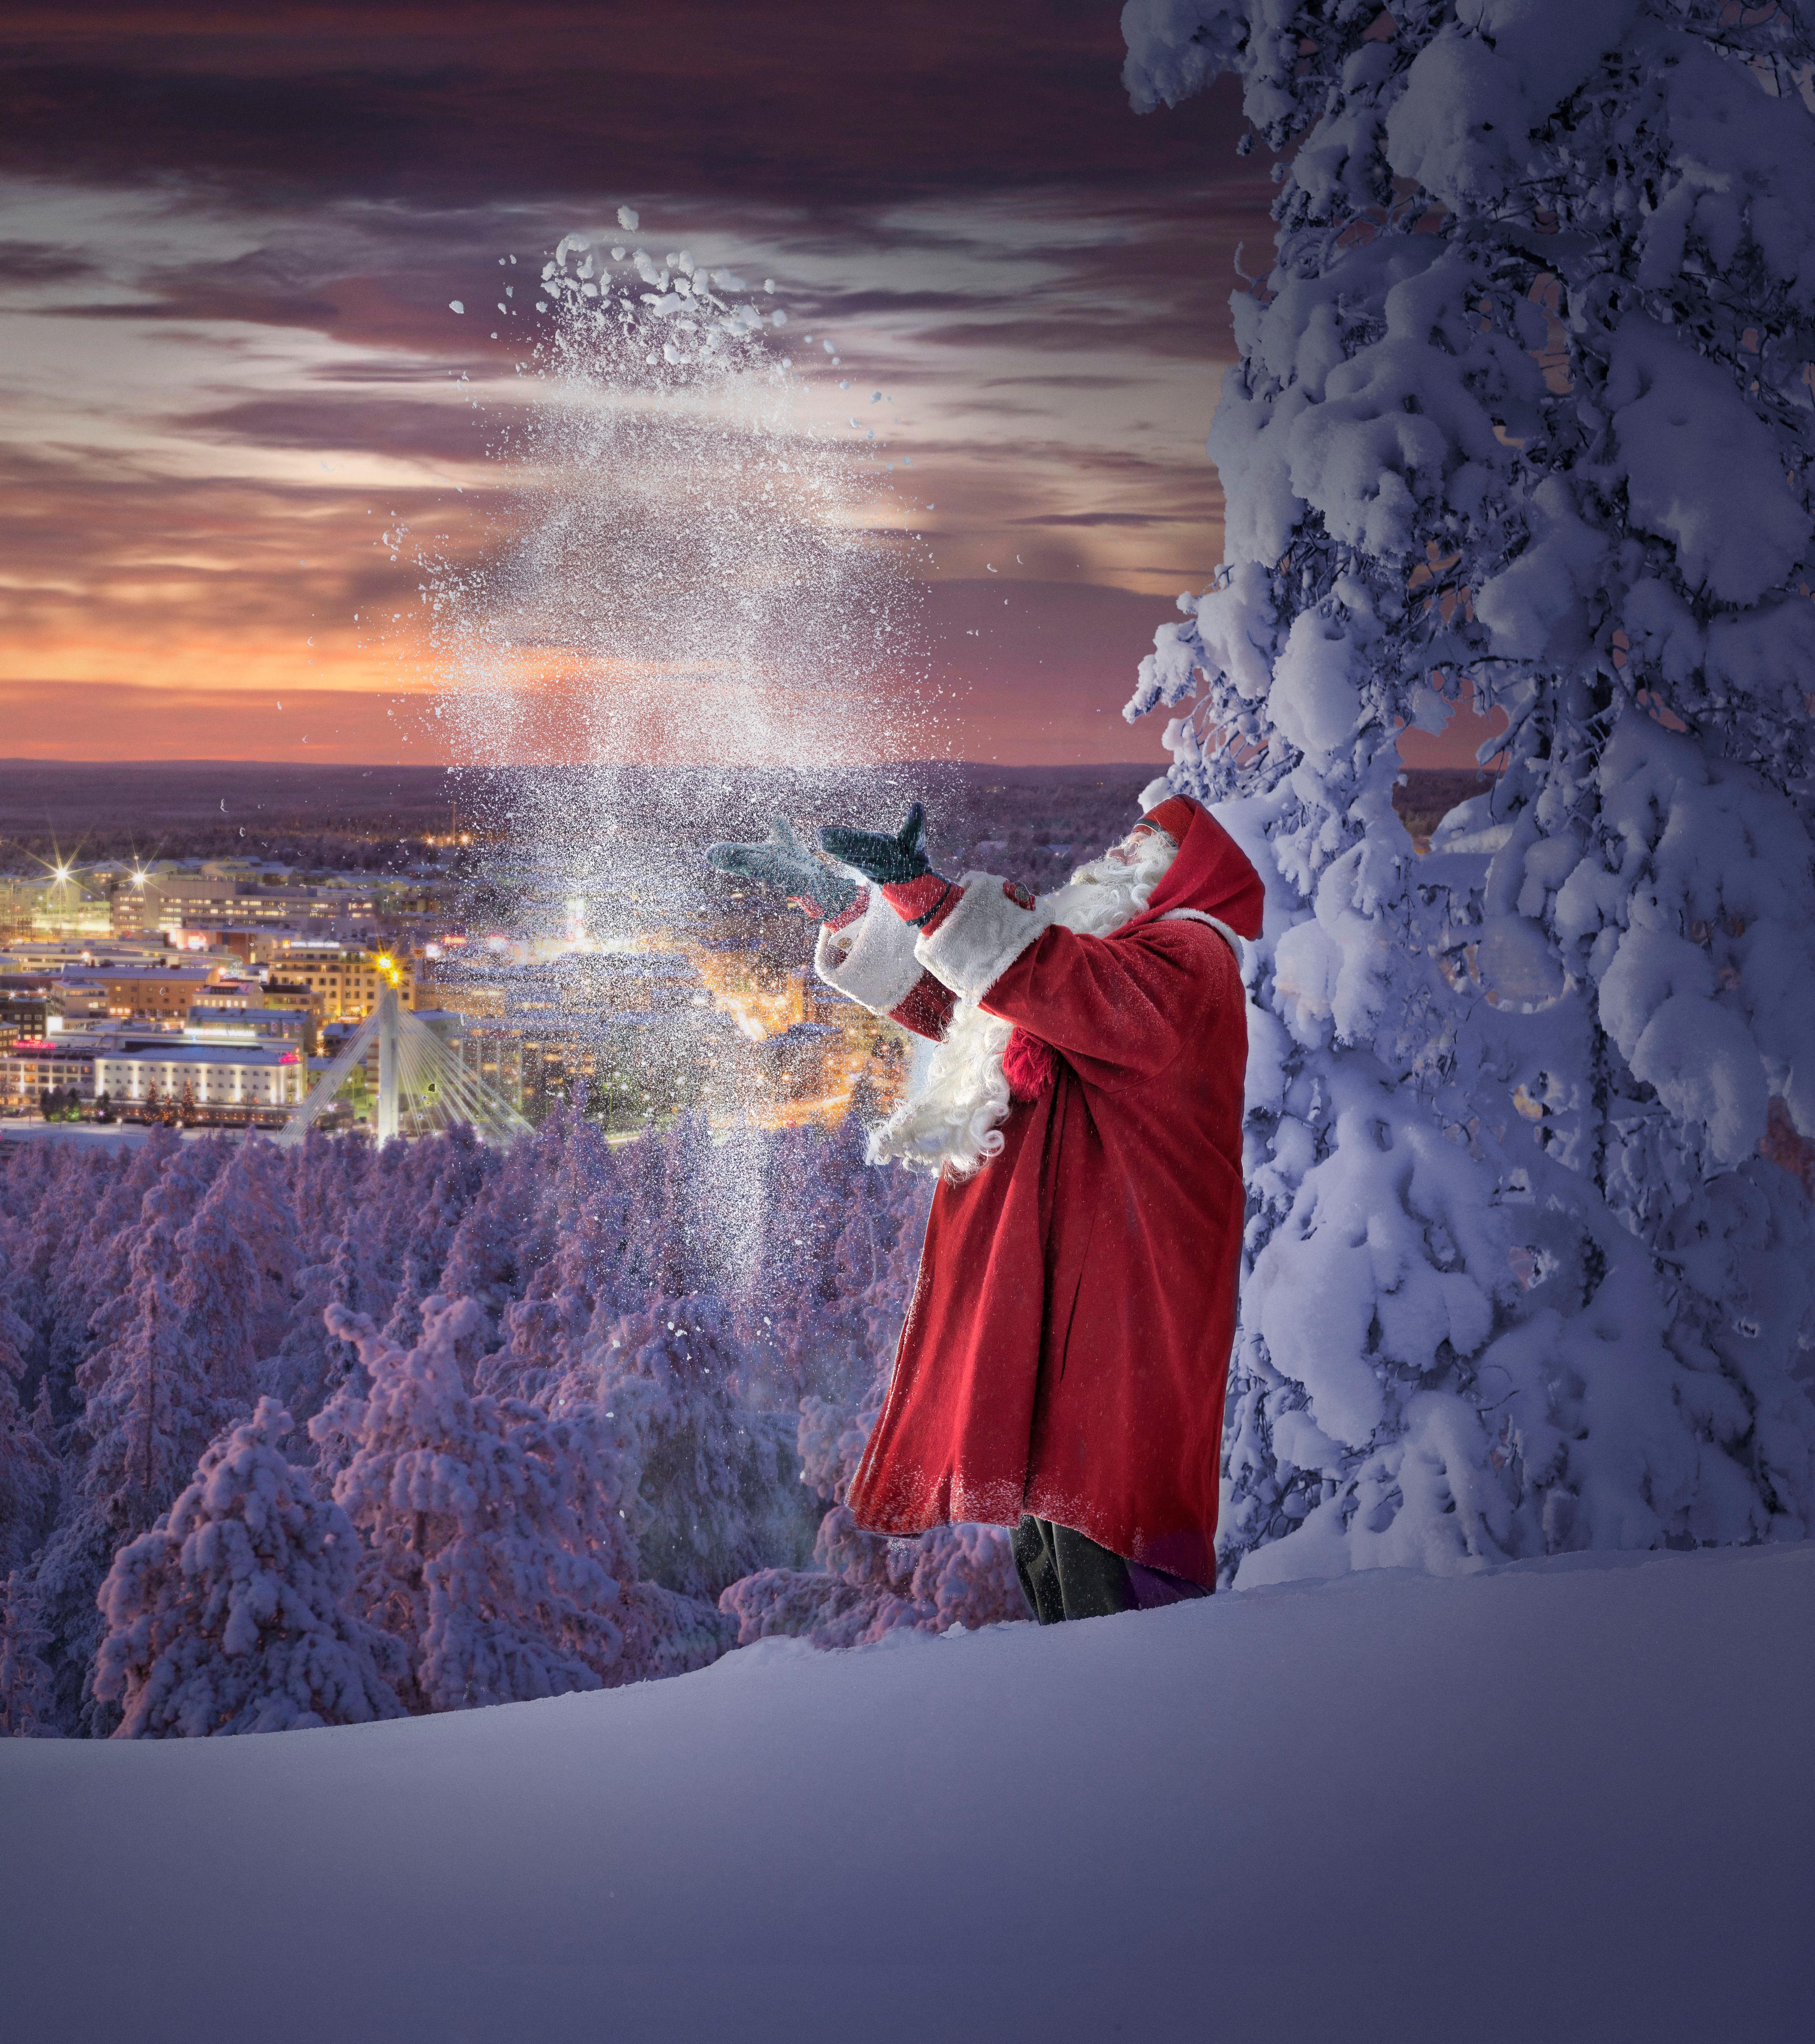 Santa throws snow in the air in front of the city of Rovaniemi